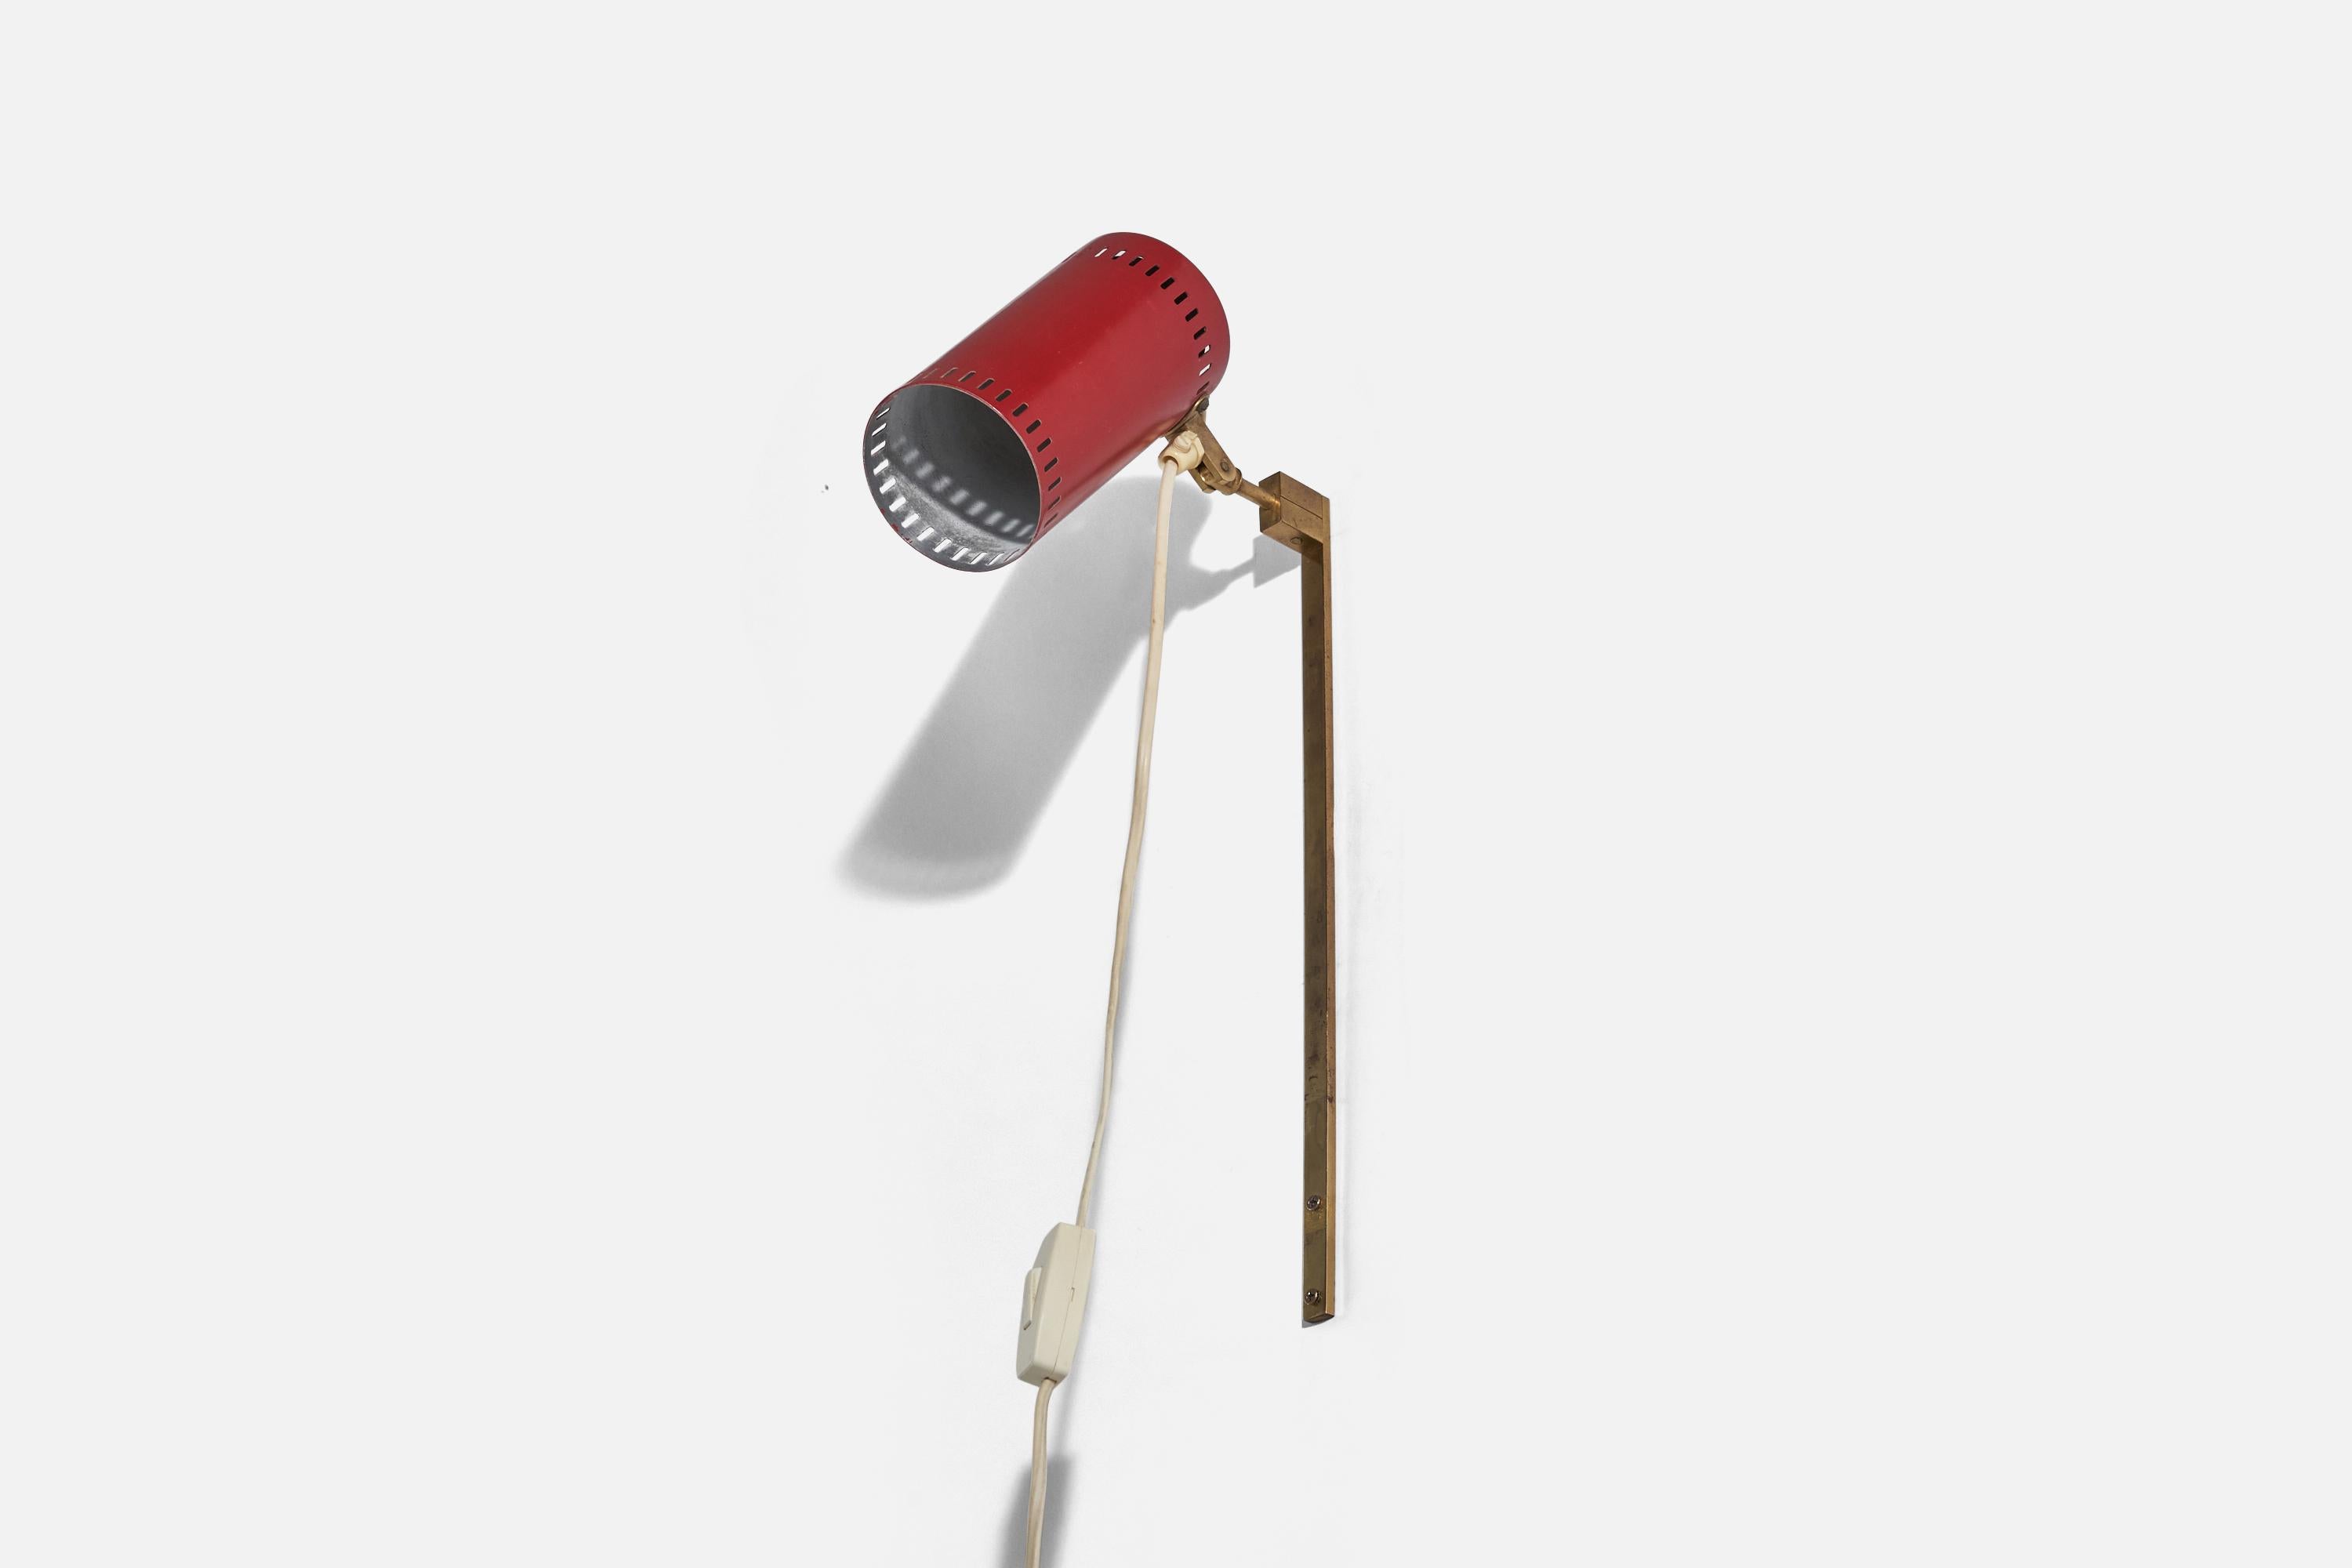 A brass and red-lacquered metal, adjustable wall light designed and produced by Öia, Sweden, c. 1960s. 

Variable dimensions, measured as illustrated in the first image.
Dimensions of Back Plate (inches) : 13.81 x 0.47 x 0.19 (Height x Width x